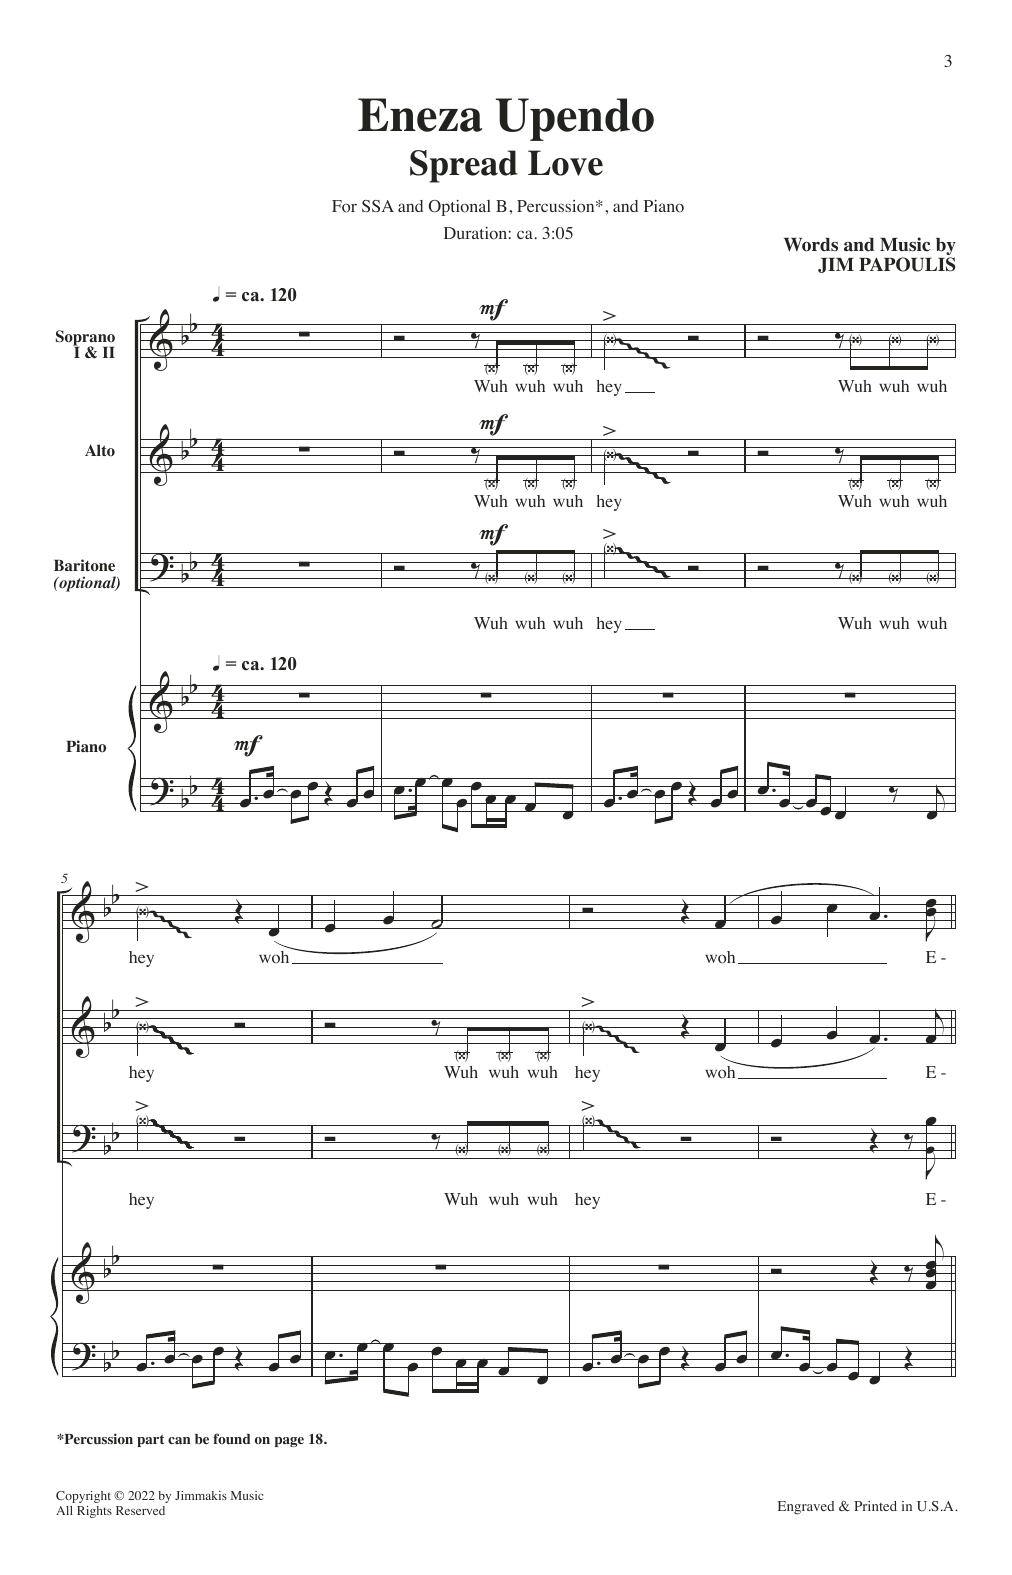 Download Jim Papoulis Eneza Upendo (Spread Love) Sheet Music